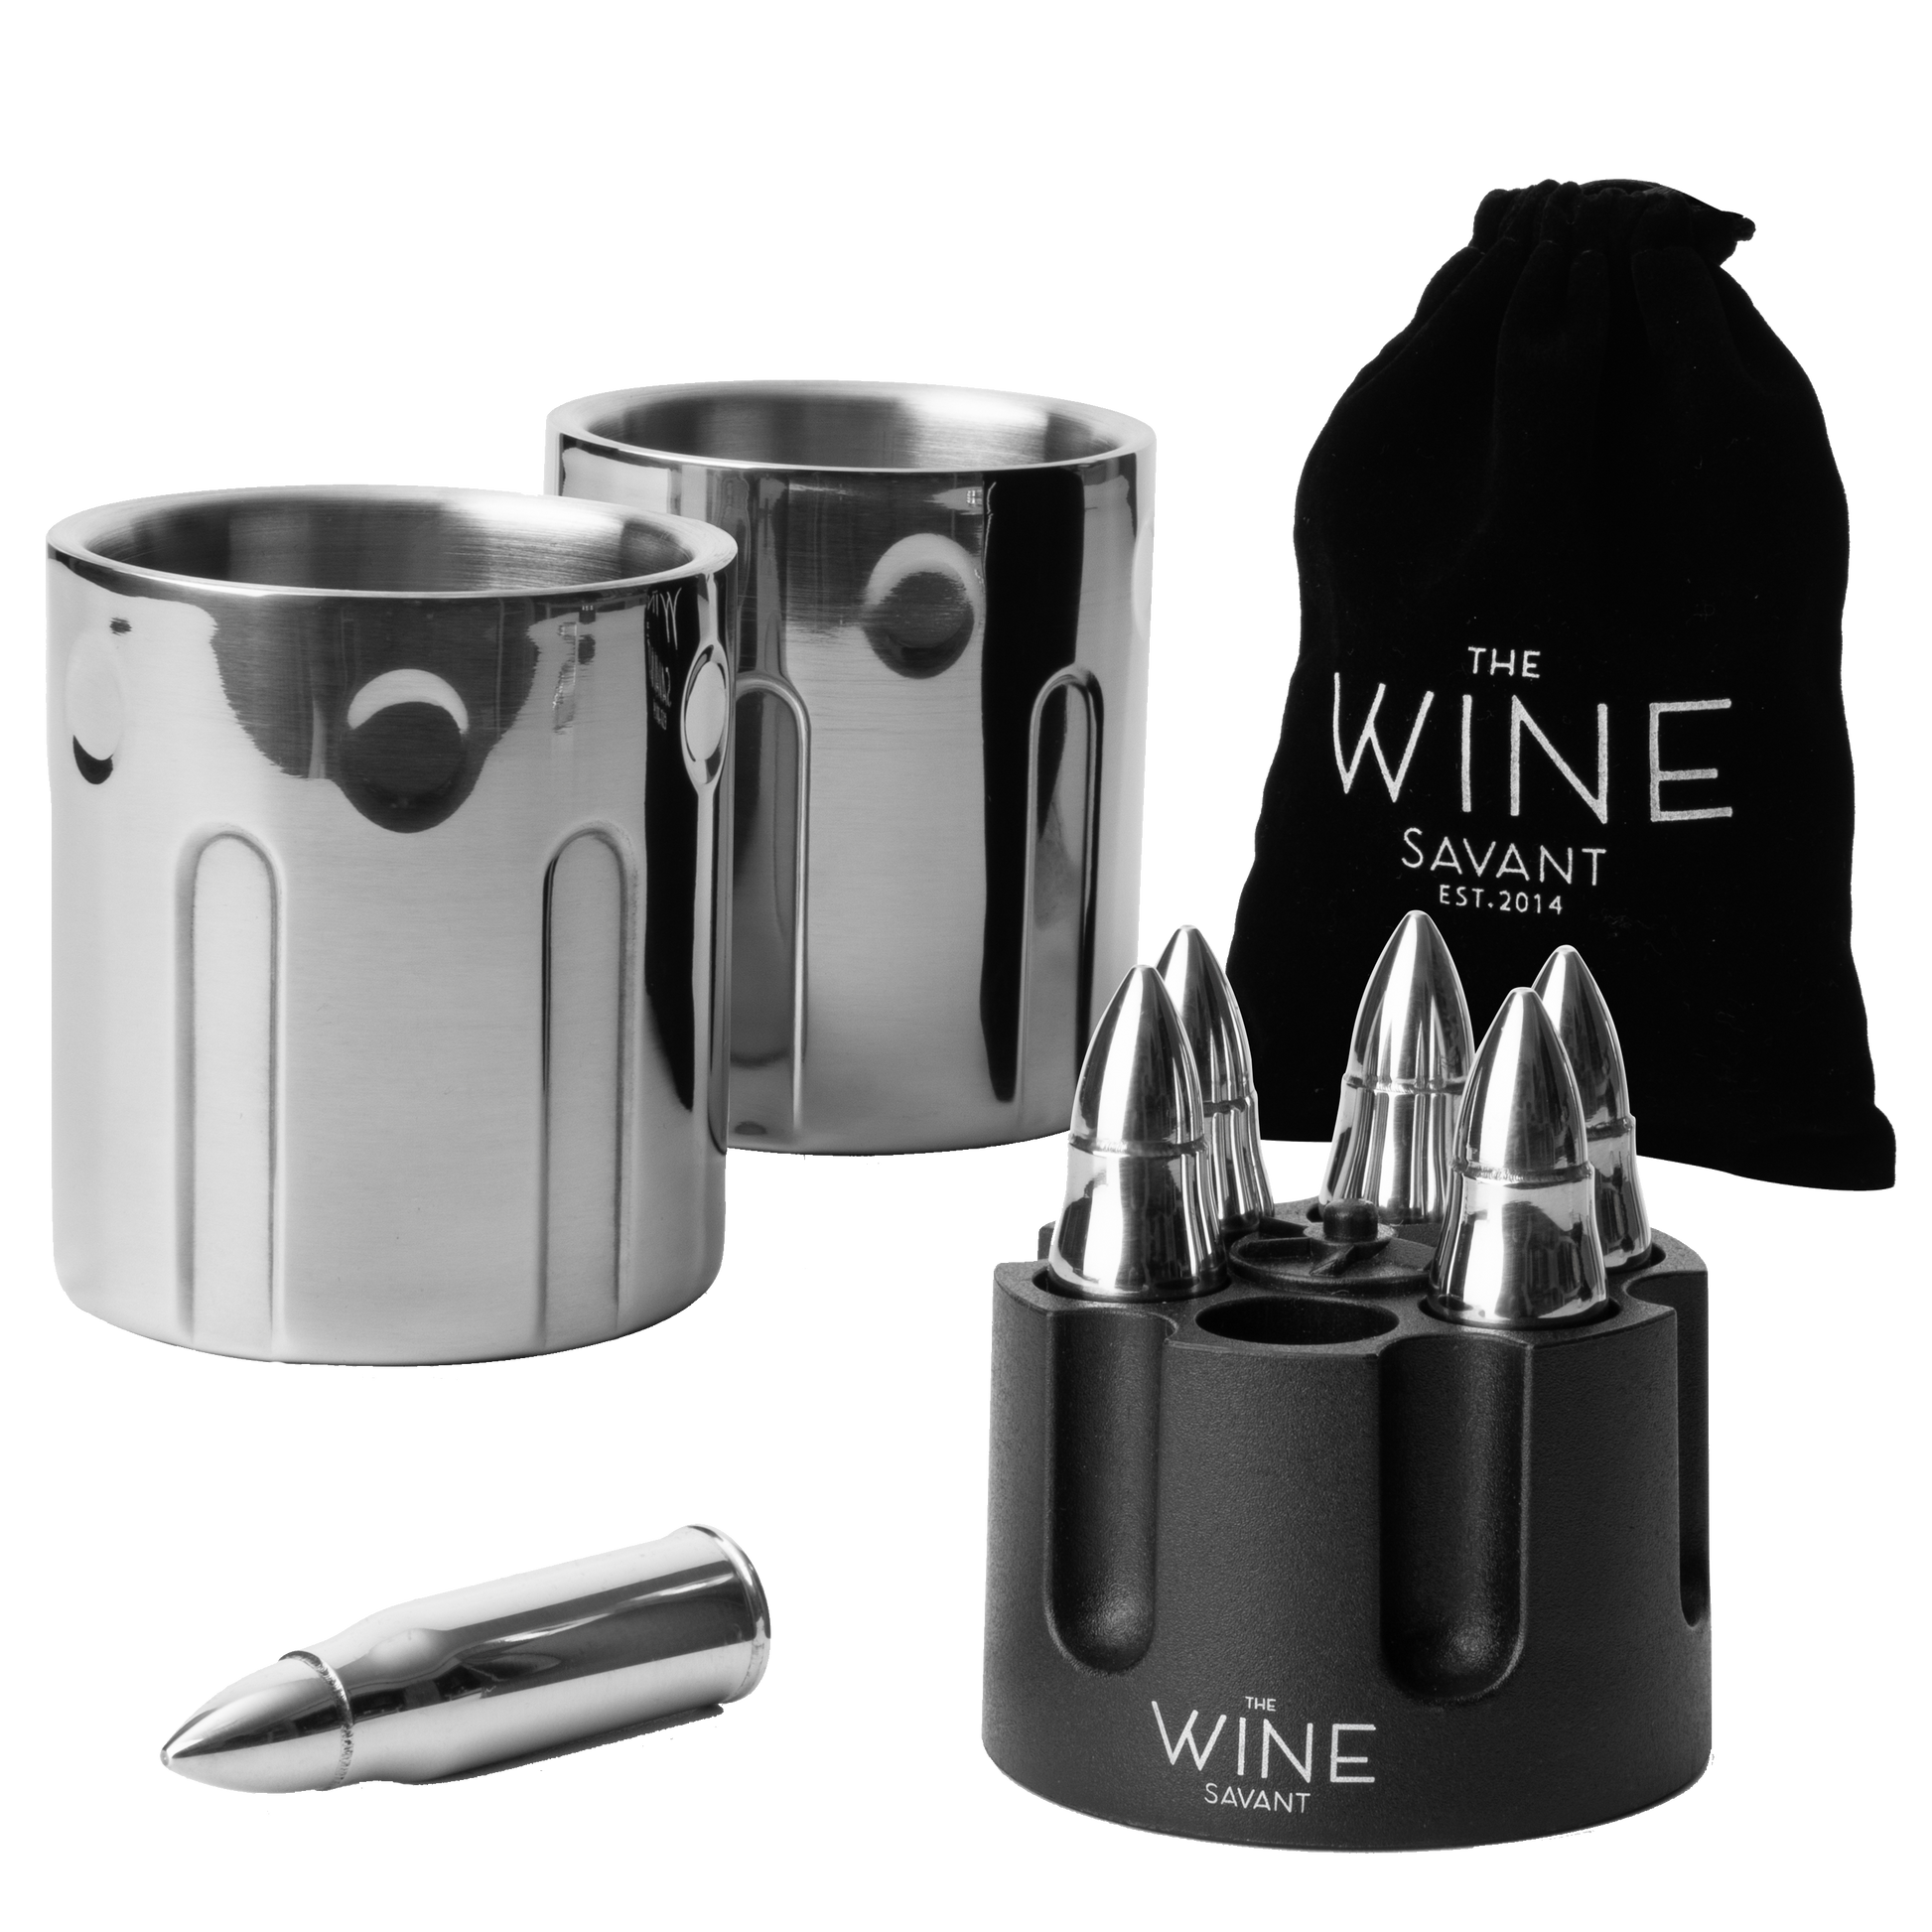 2 Metal Ice Cups & Bullet Chillers by The Wine Savant - Whiskey Stones Bullets Stainless Steel with Revolver Case, 1.75in Bullet Chillers Set of 6, Whiskey Gift Sets, Military Gifts, Veteran Gifts-0